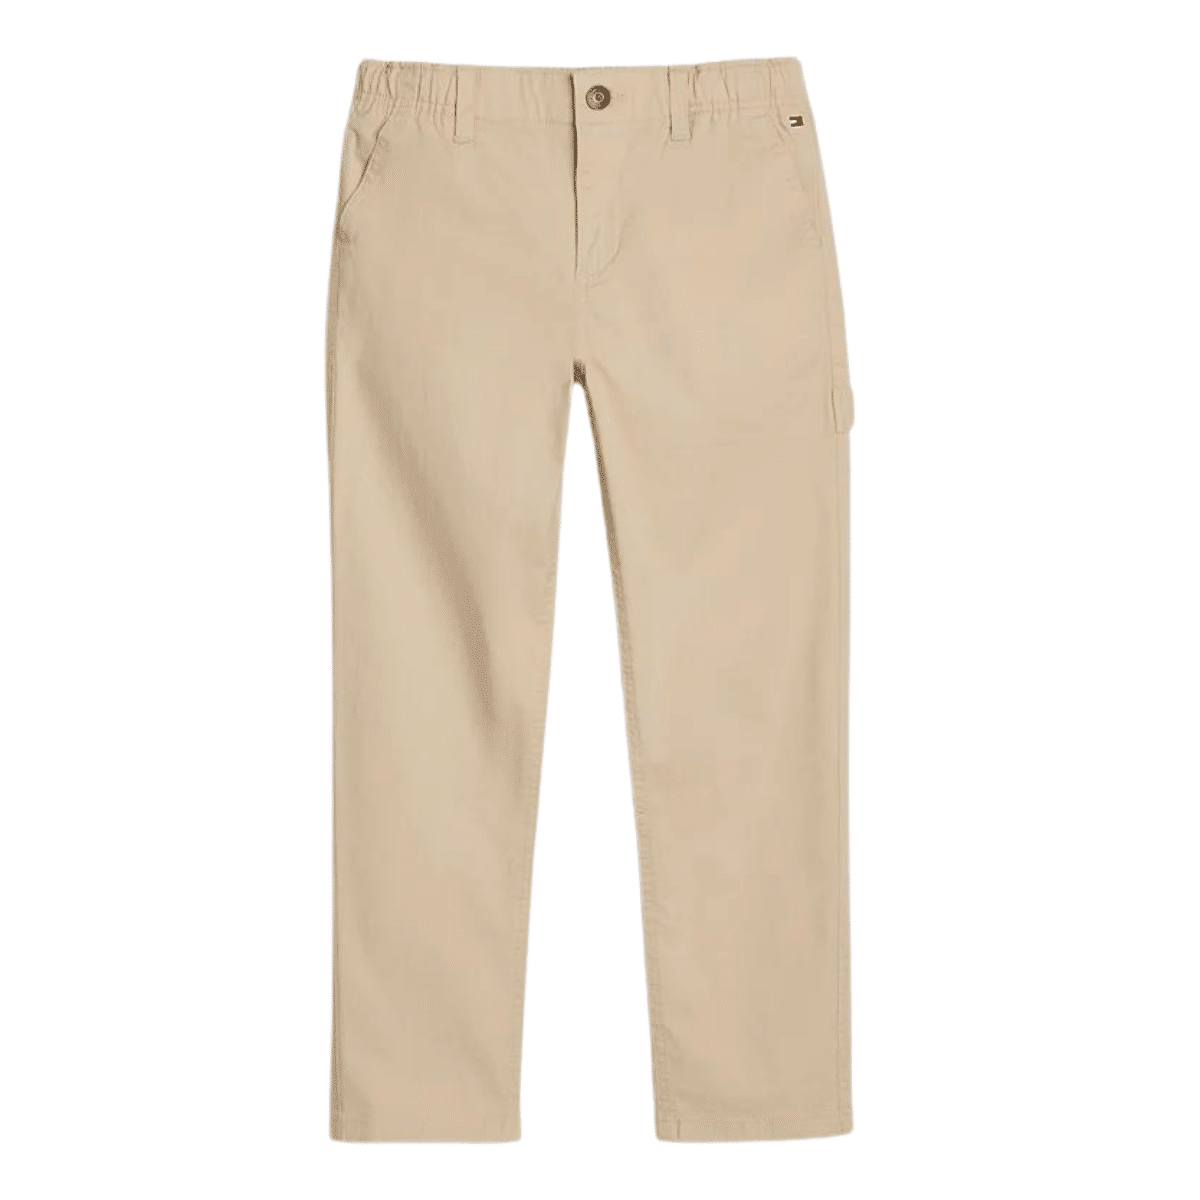 tommy hilfiger beige skater boys trousers front view